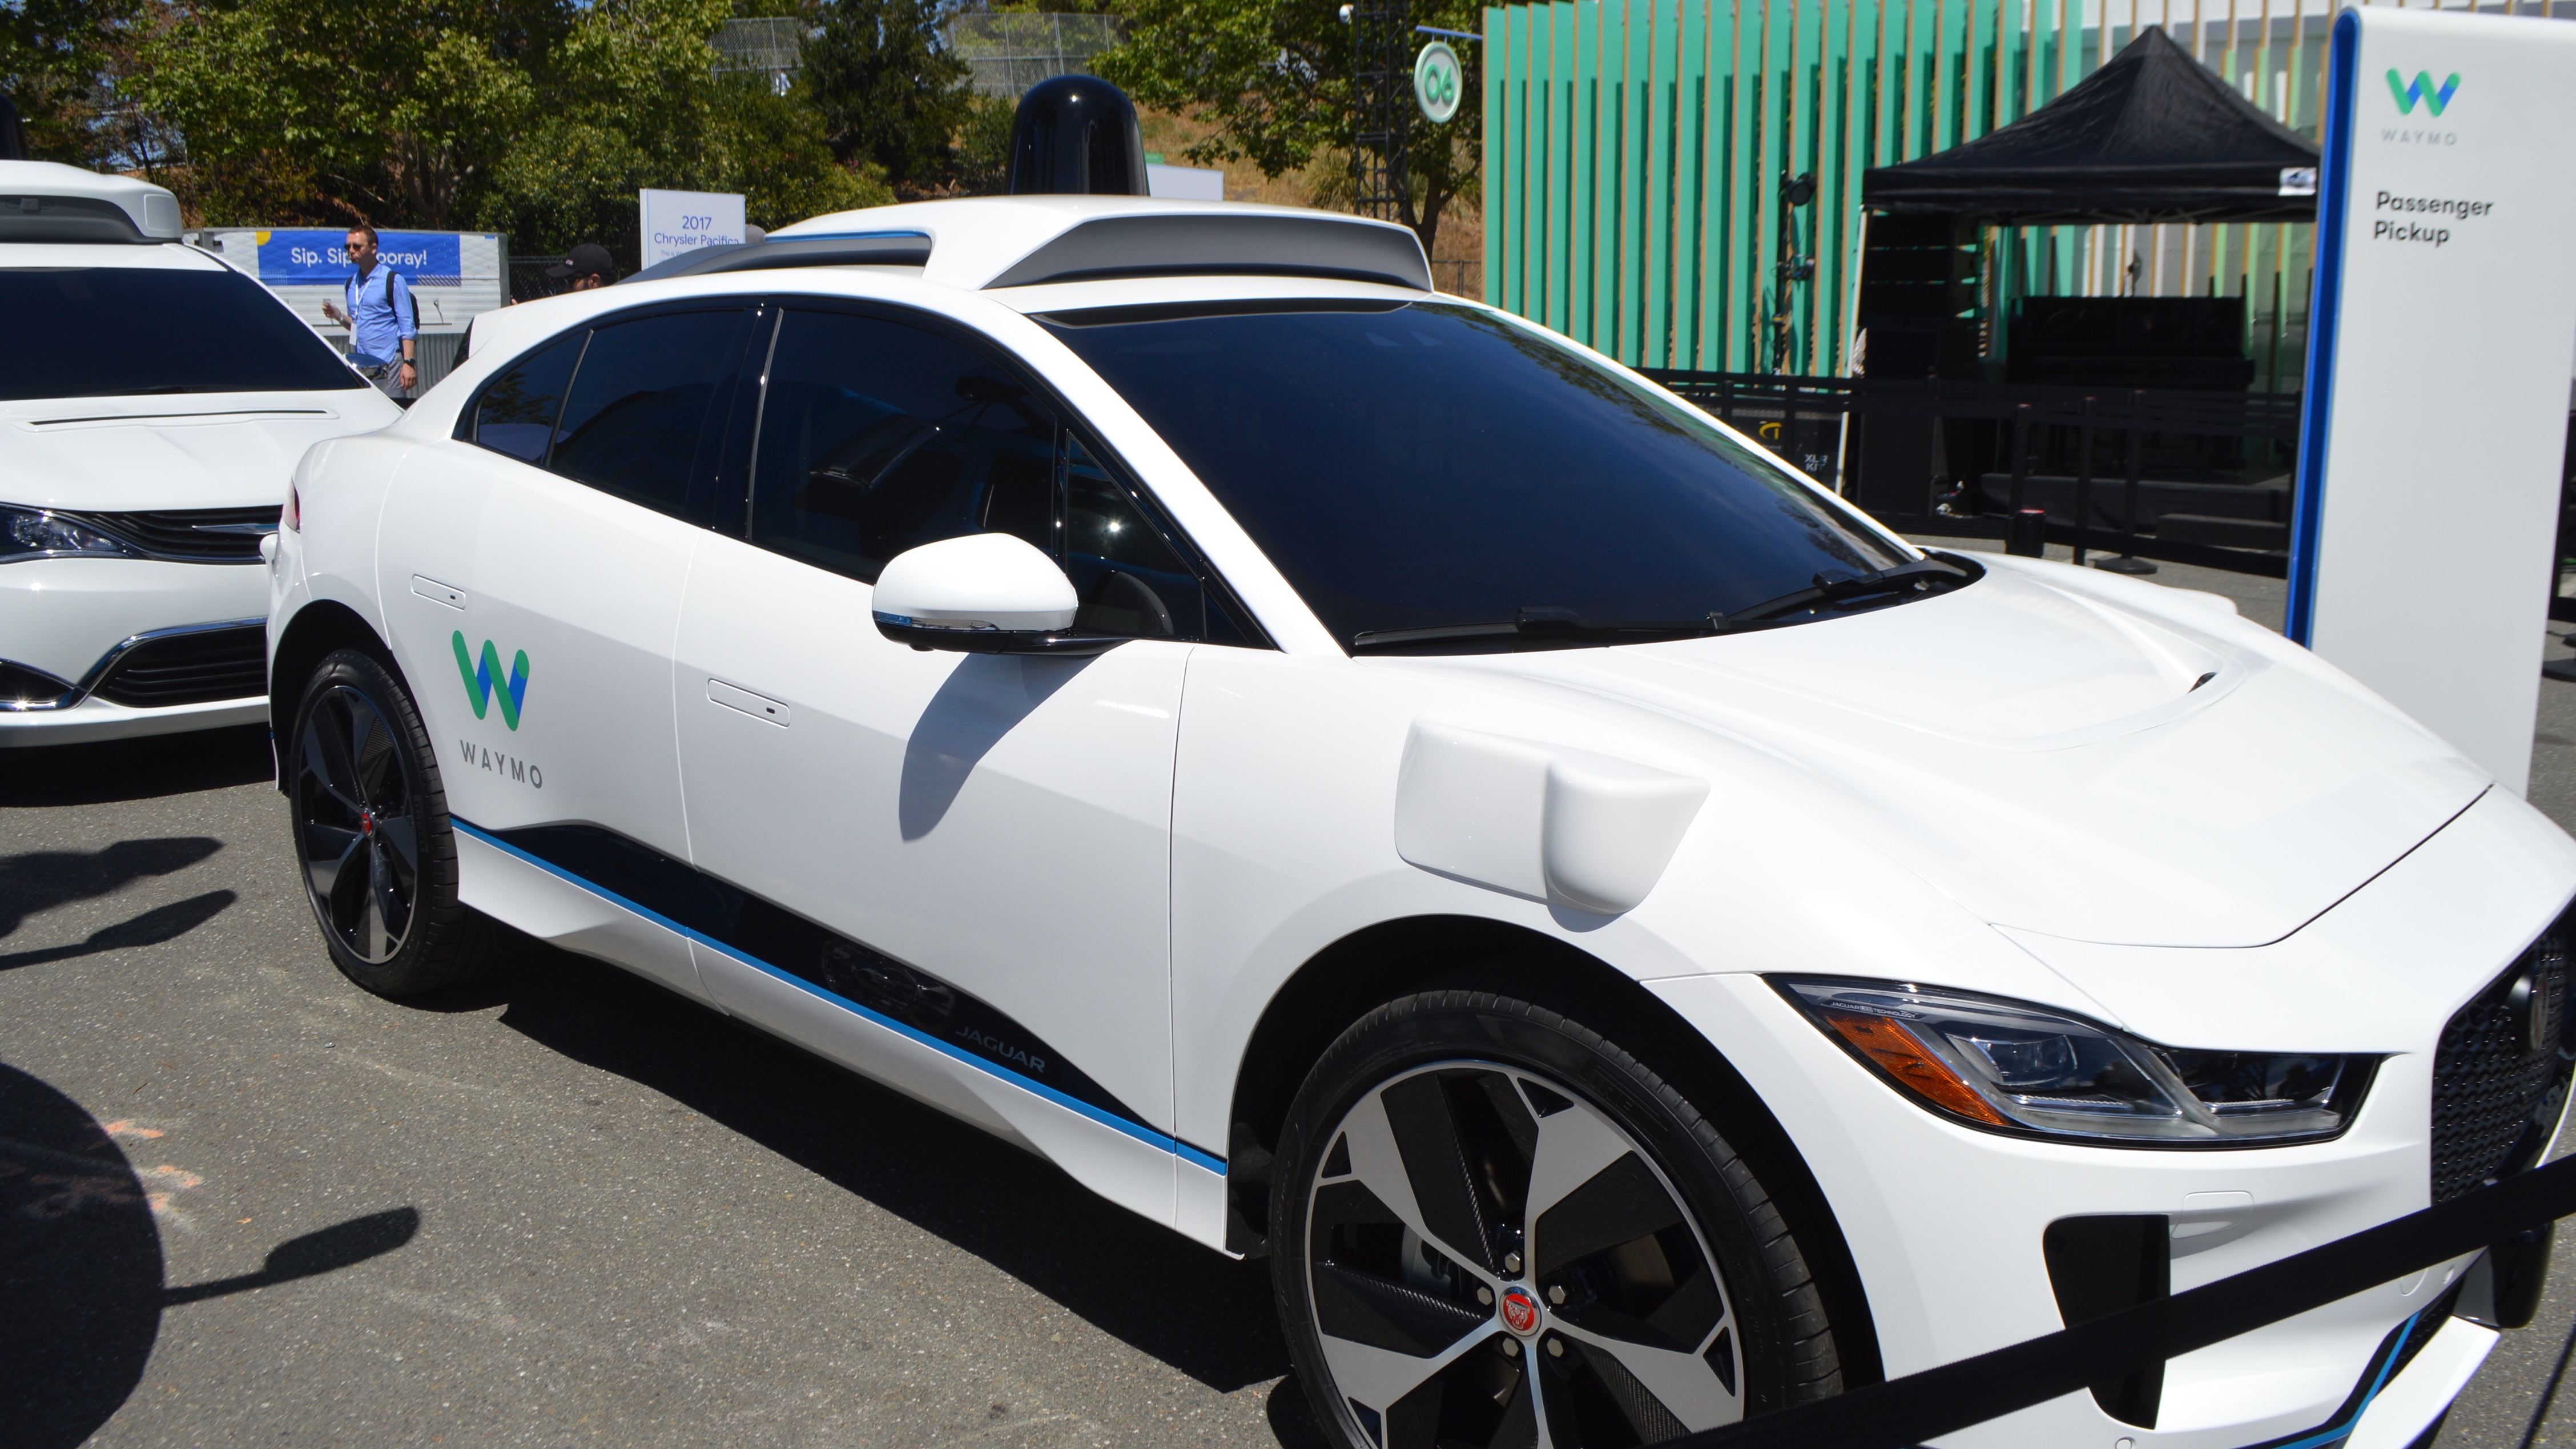 This is what the Waymo selfdriving Jaguar IPace looks like in real